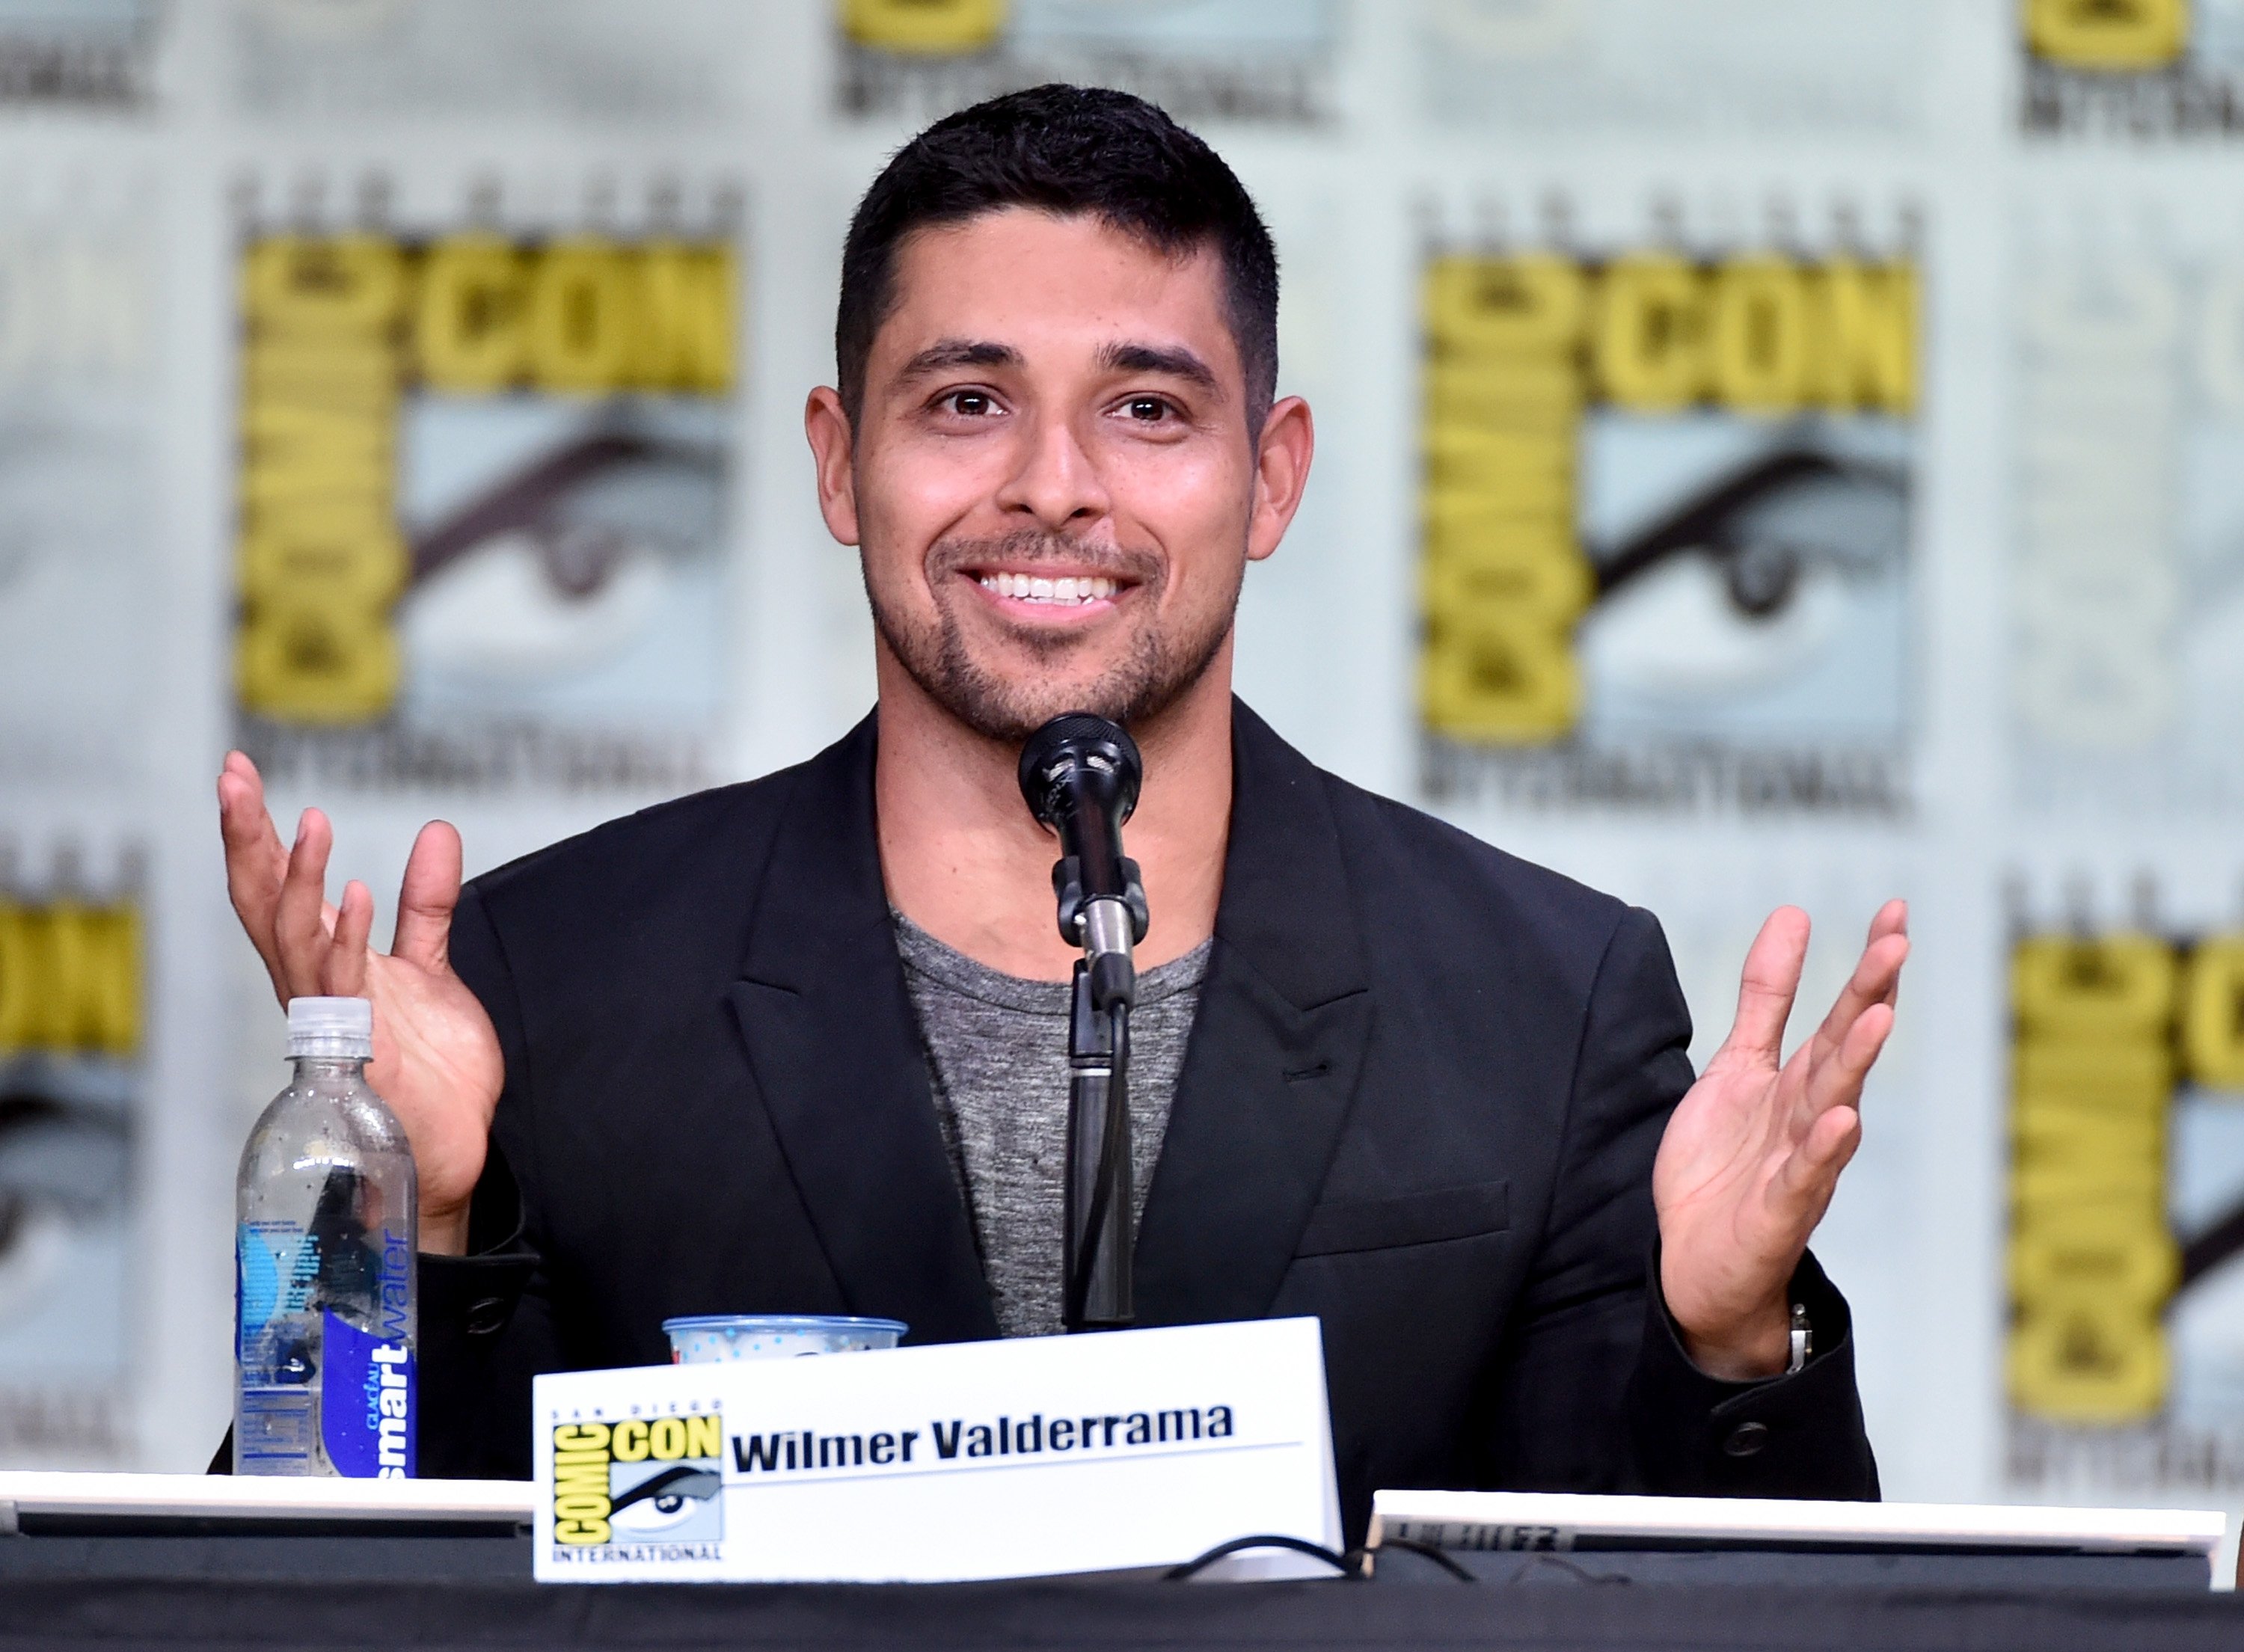 Wilmer Valderrama attends CBS Television Studios Block during Comic-Con International | Source: Getty Images